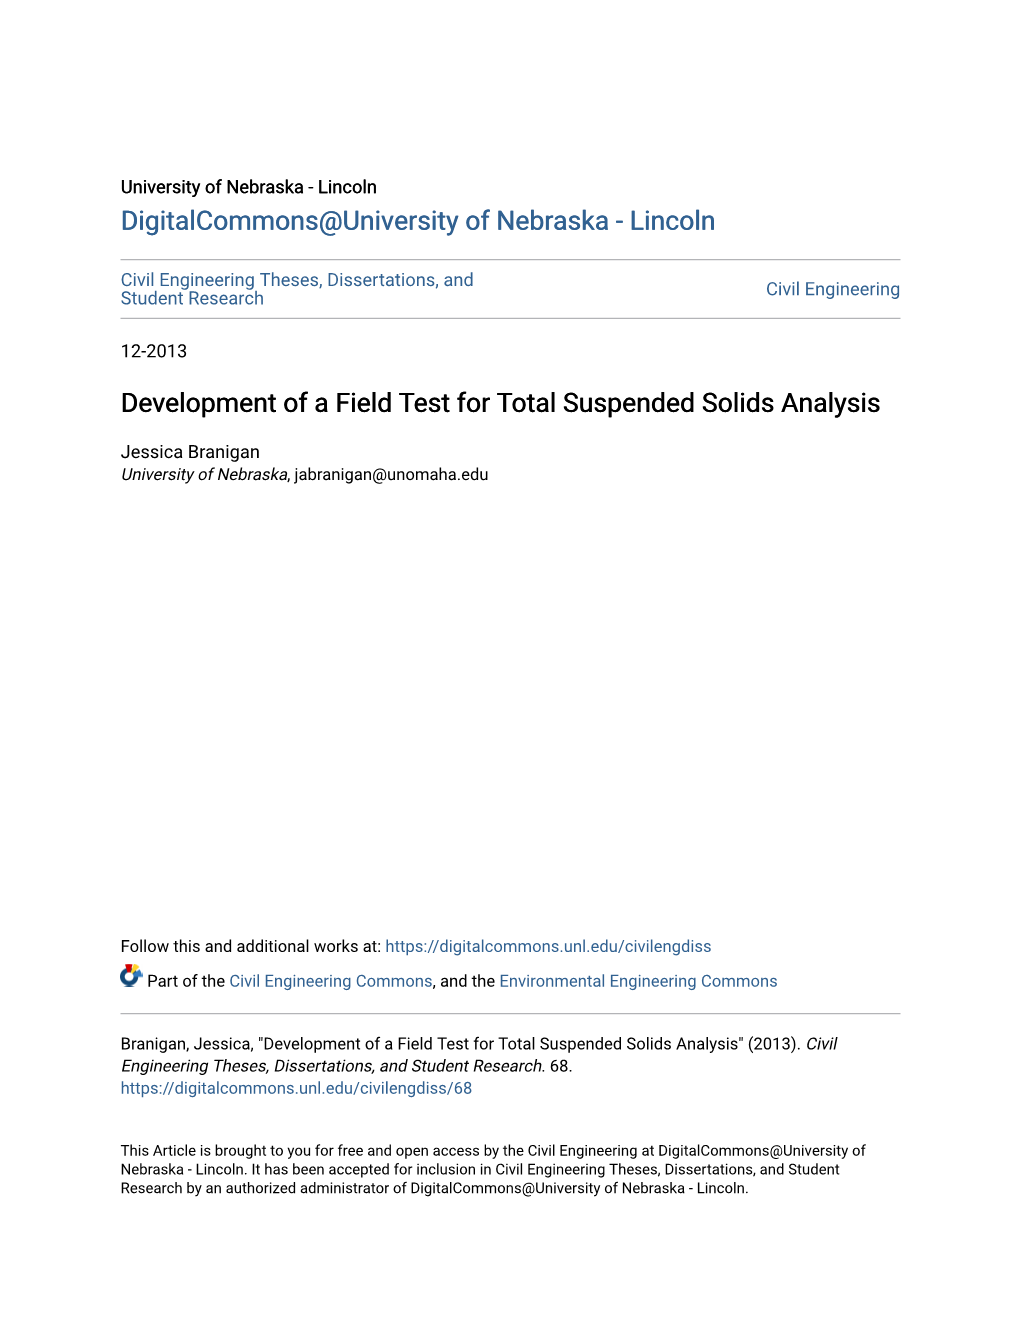 Development of a Field Test for Total Suspended Solids Analysis